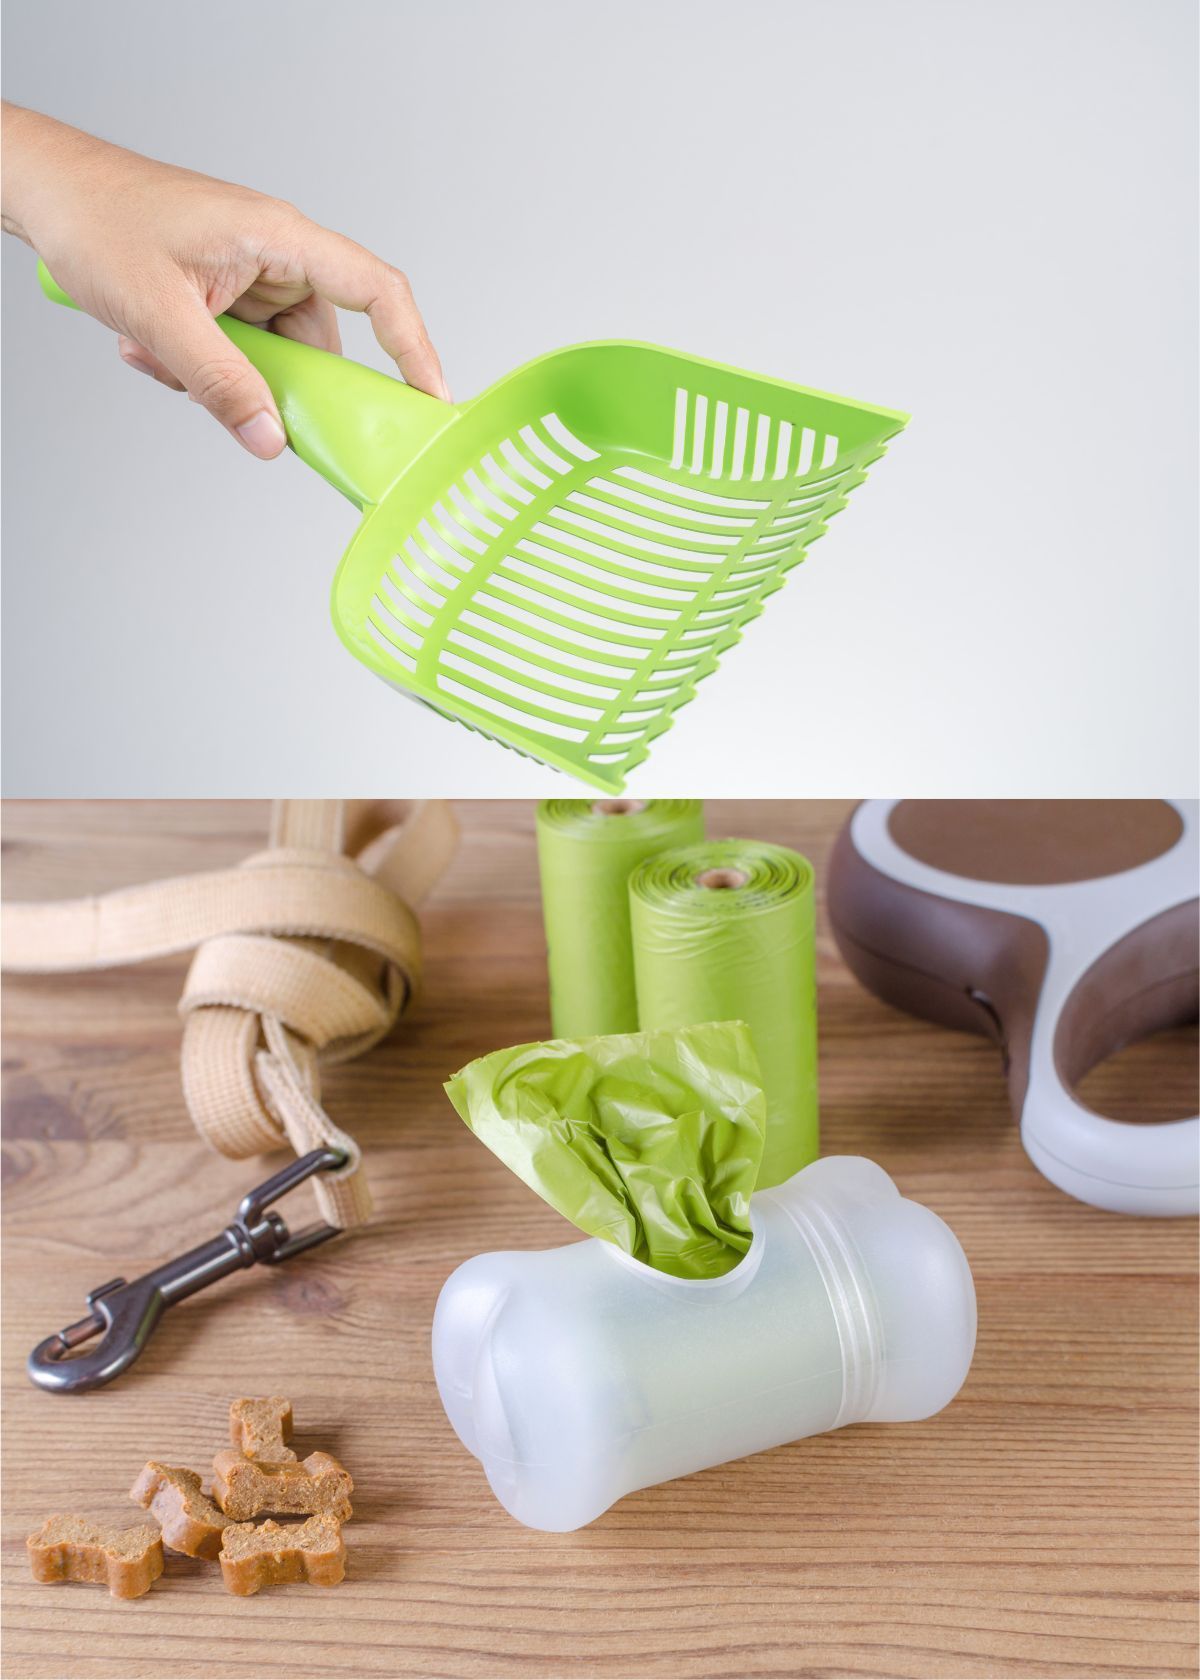 How to Keep Your Home Smelling Fresh with the Right Cat Scooper!